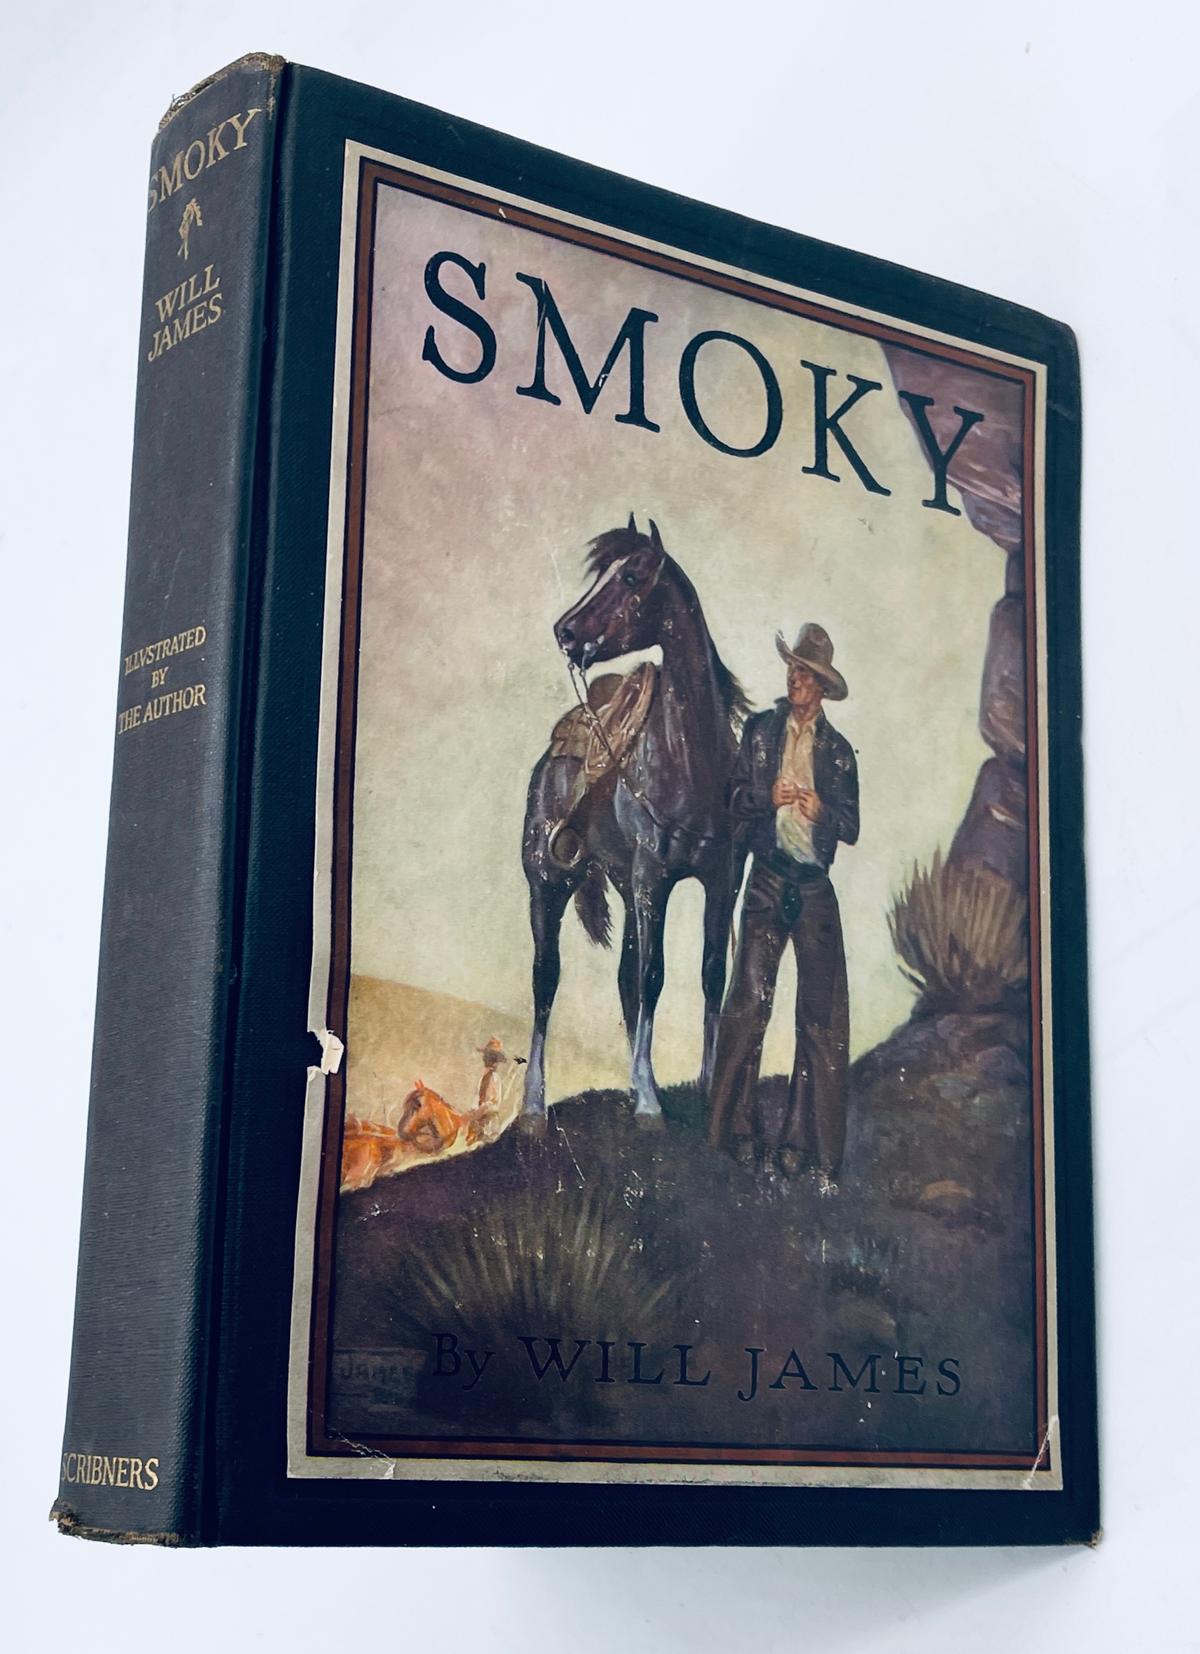 SMOKY The Cow Horse by WILL JAMES (c.1940)